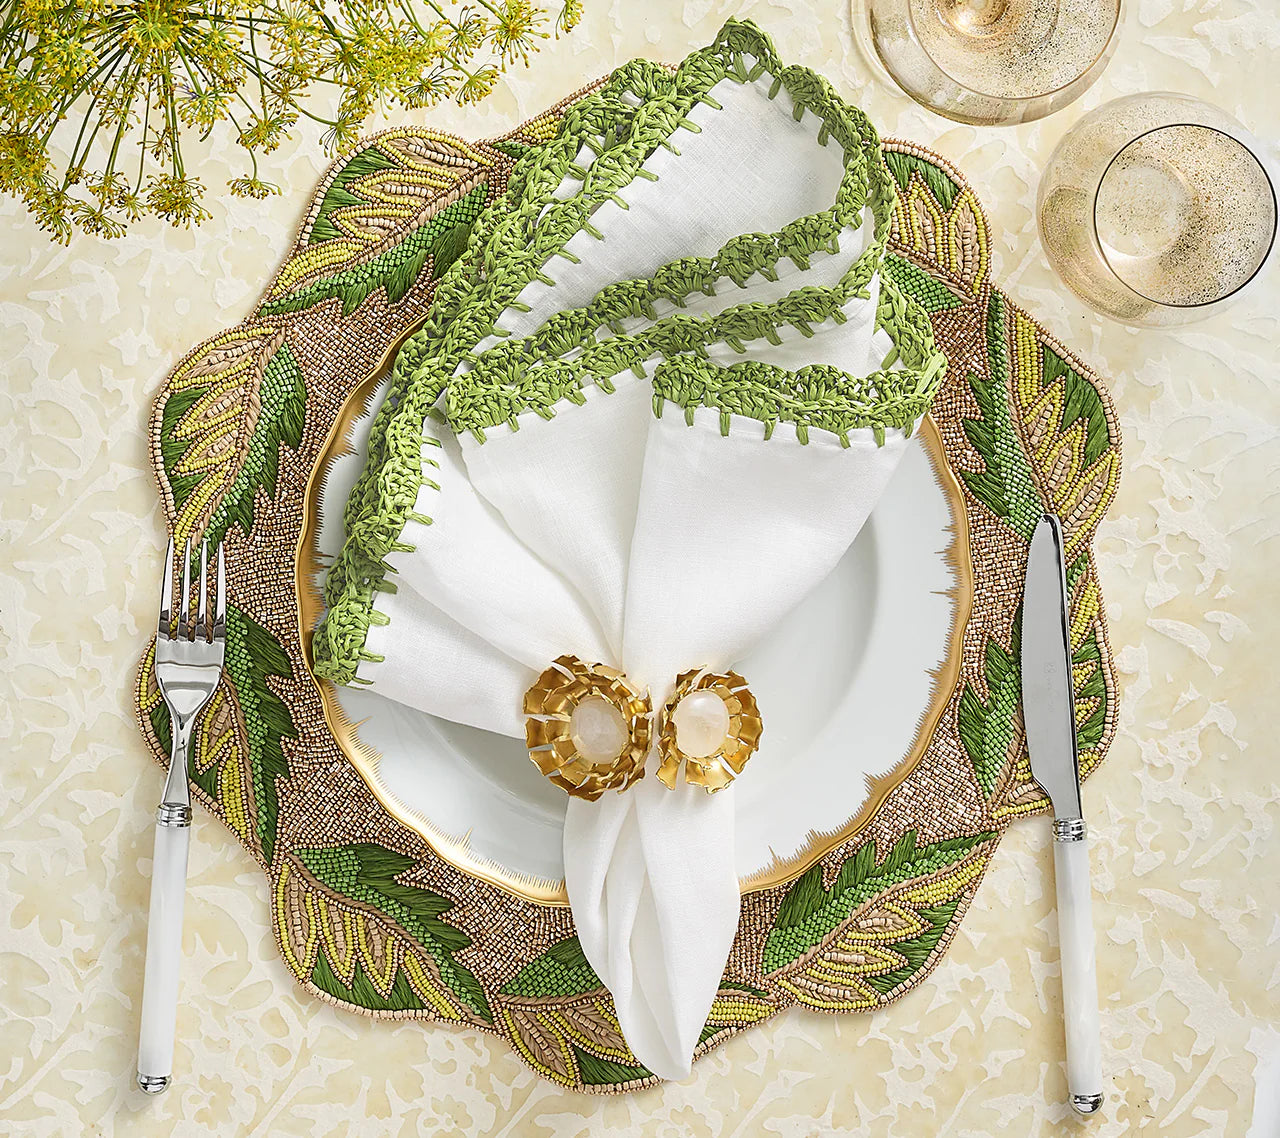 Winding Vines Placemat in Green & Gold, Set of 2